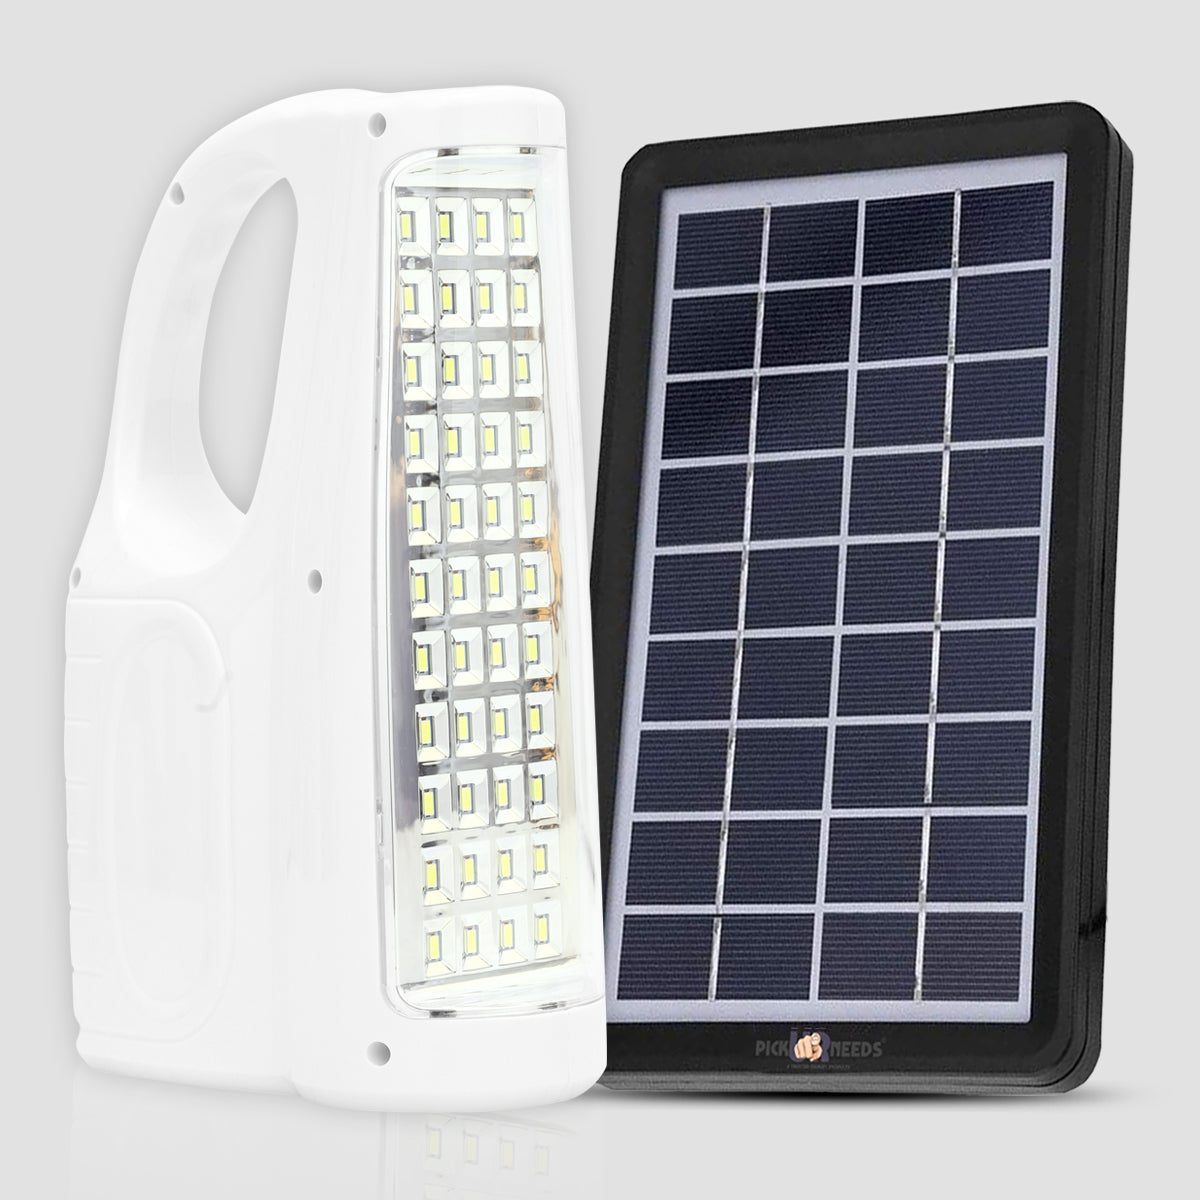 Pick Ur Needs Brightest Rechargeable 44 LED Home Emergency Lantern Light with Eco Friendly Solar Panel (9V+ 3 W)